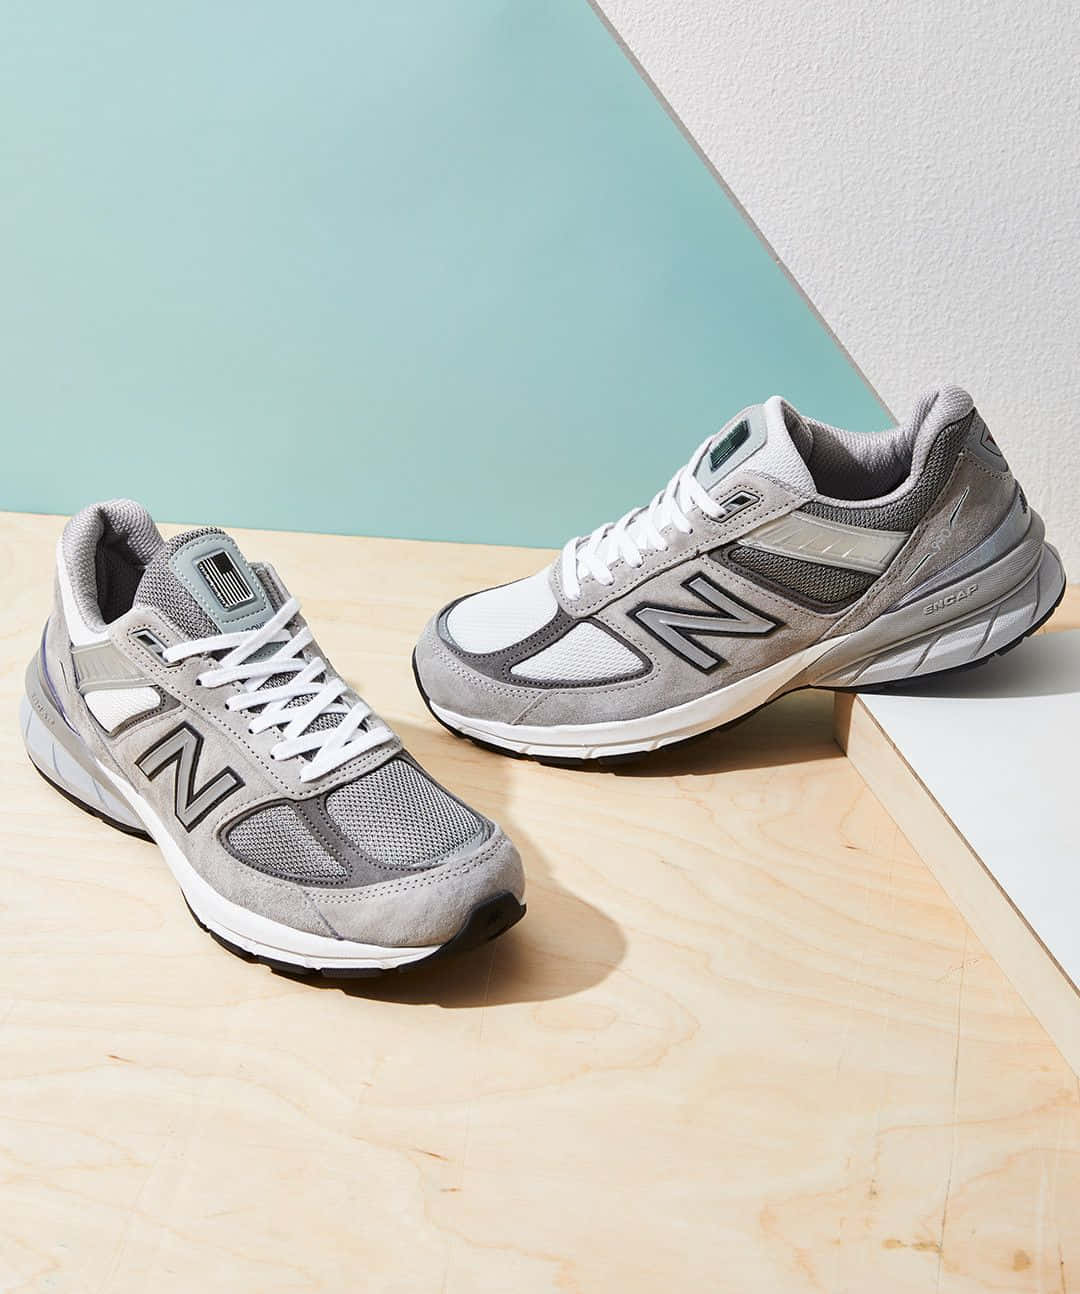 Step up your style with New Balance